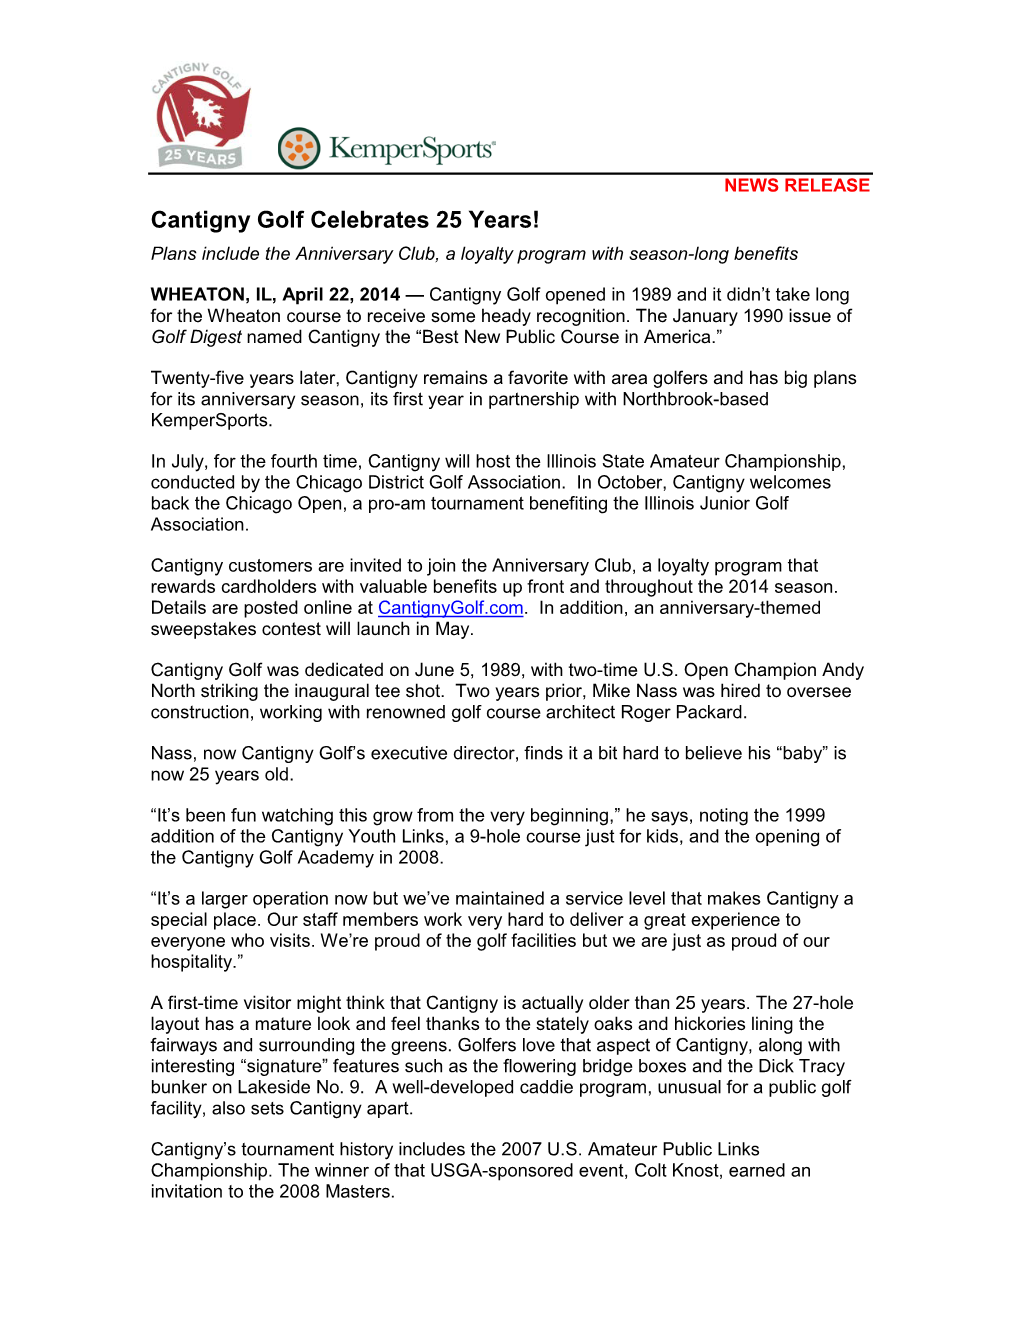 Cantigny Golf Celebrates 25 Years! Plans Include the Anniversary Club, a Loyalty Program with Season-Long Benefits